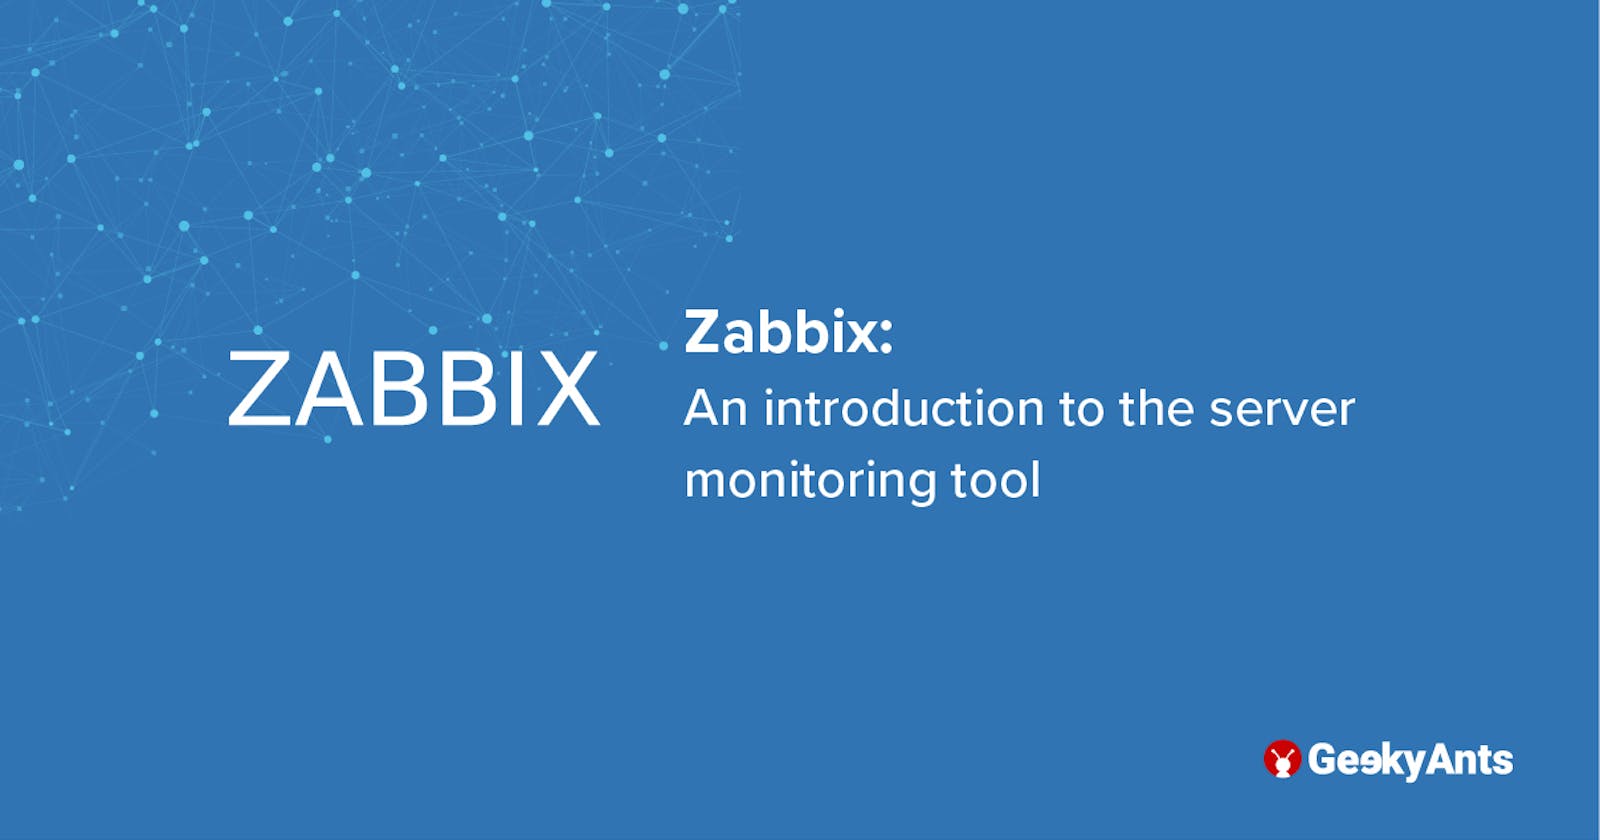 Zabbix: An Introduction To The Server Monitoring Tool